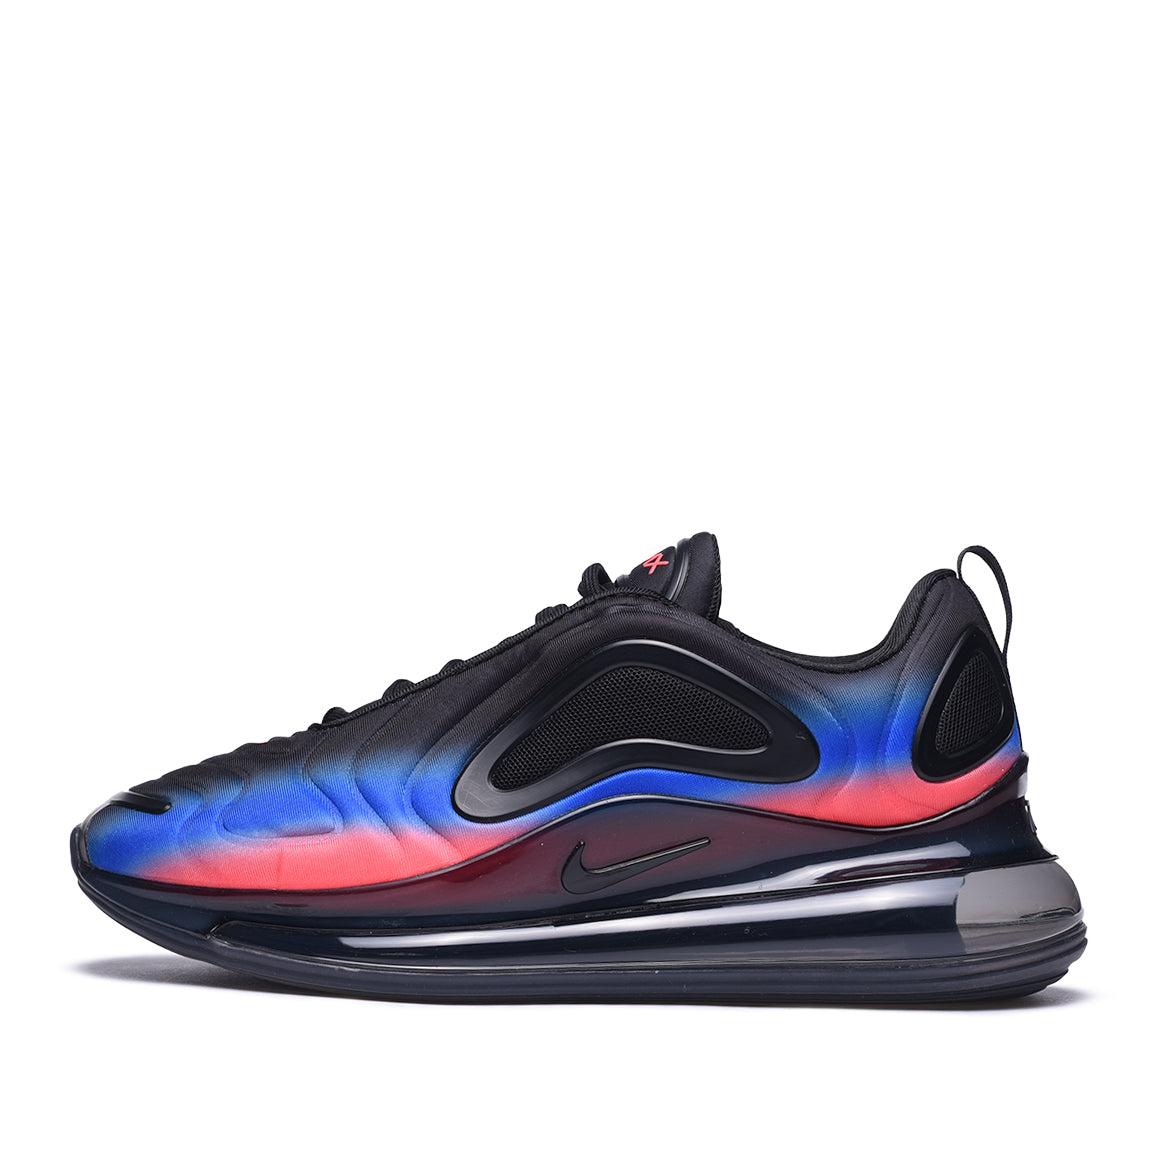 air max 720 black with colors